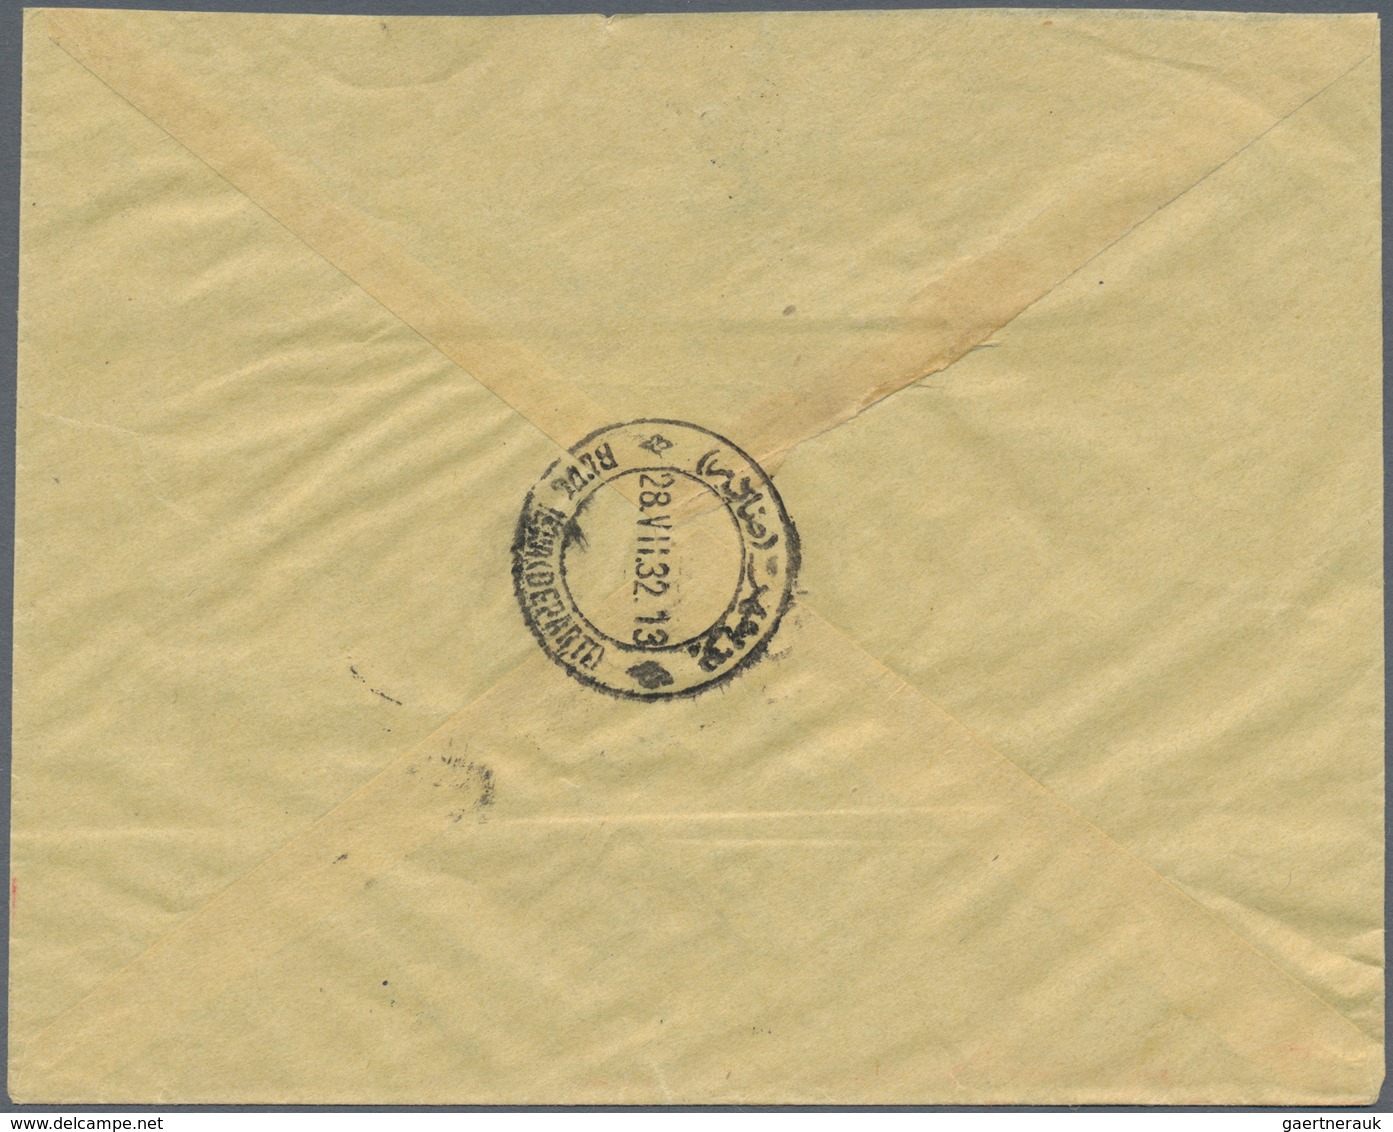 Iran: 1932, Stampless Official Cover To Munich Post Office, On Reverse Bilingual Datestamp "28.VII.3 - Iran